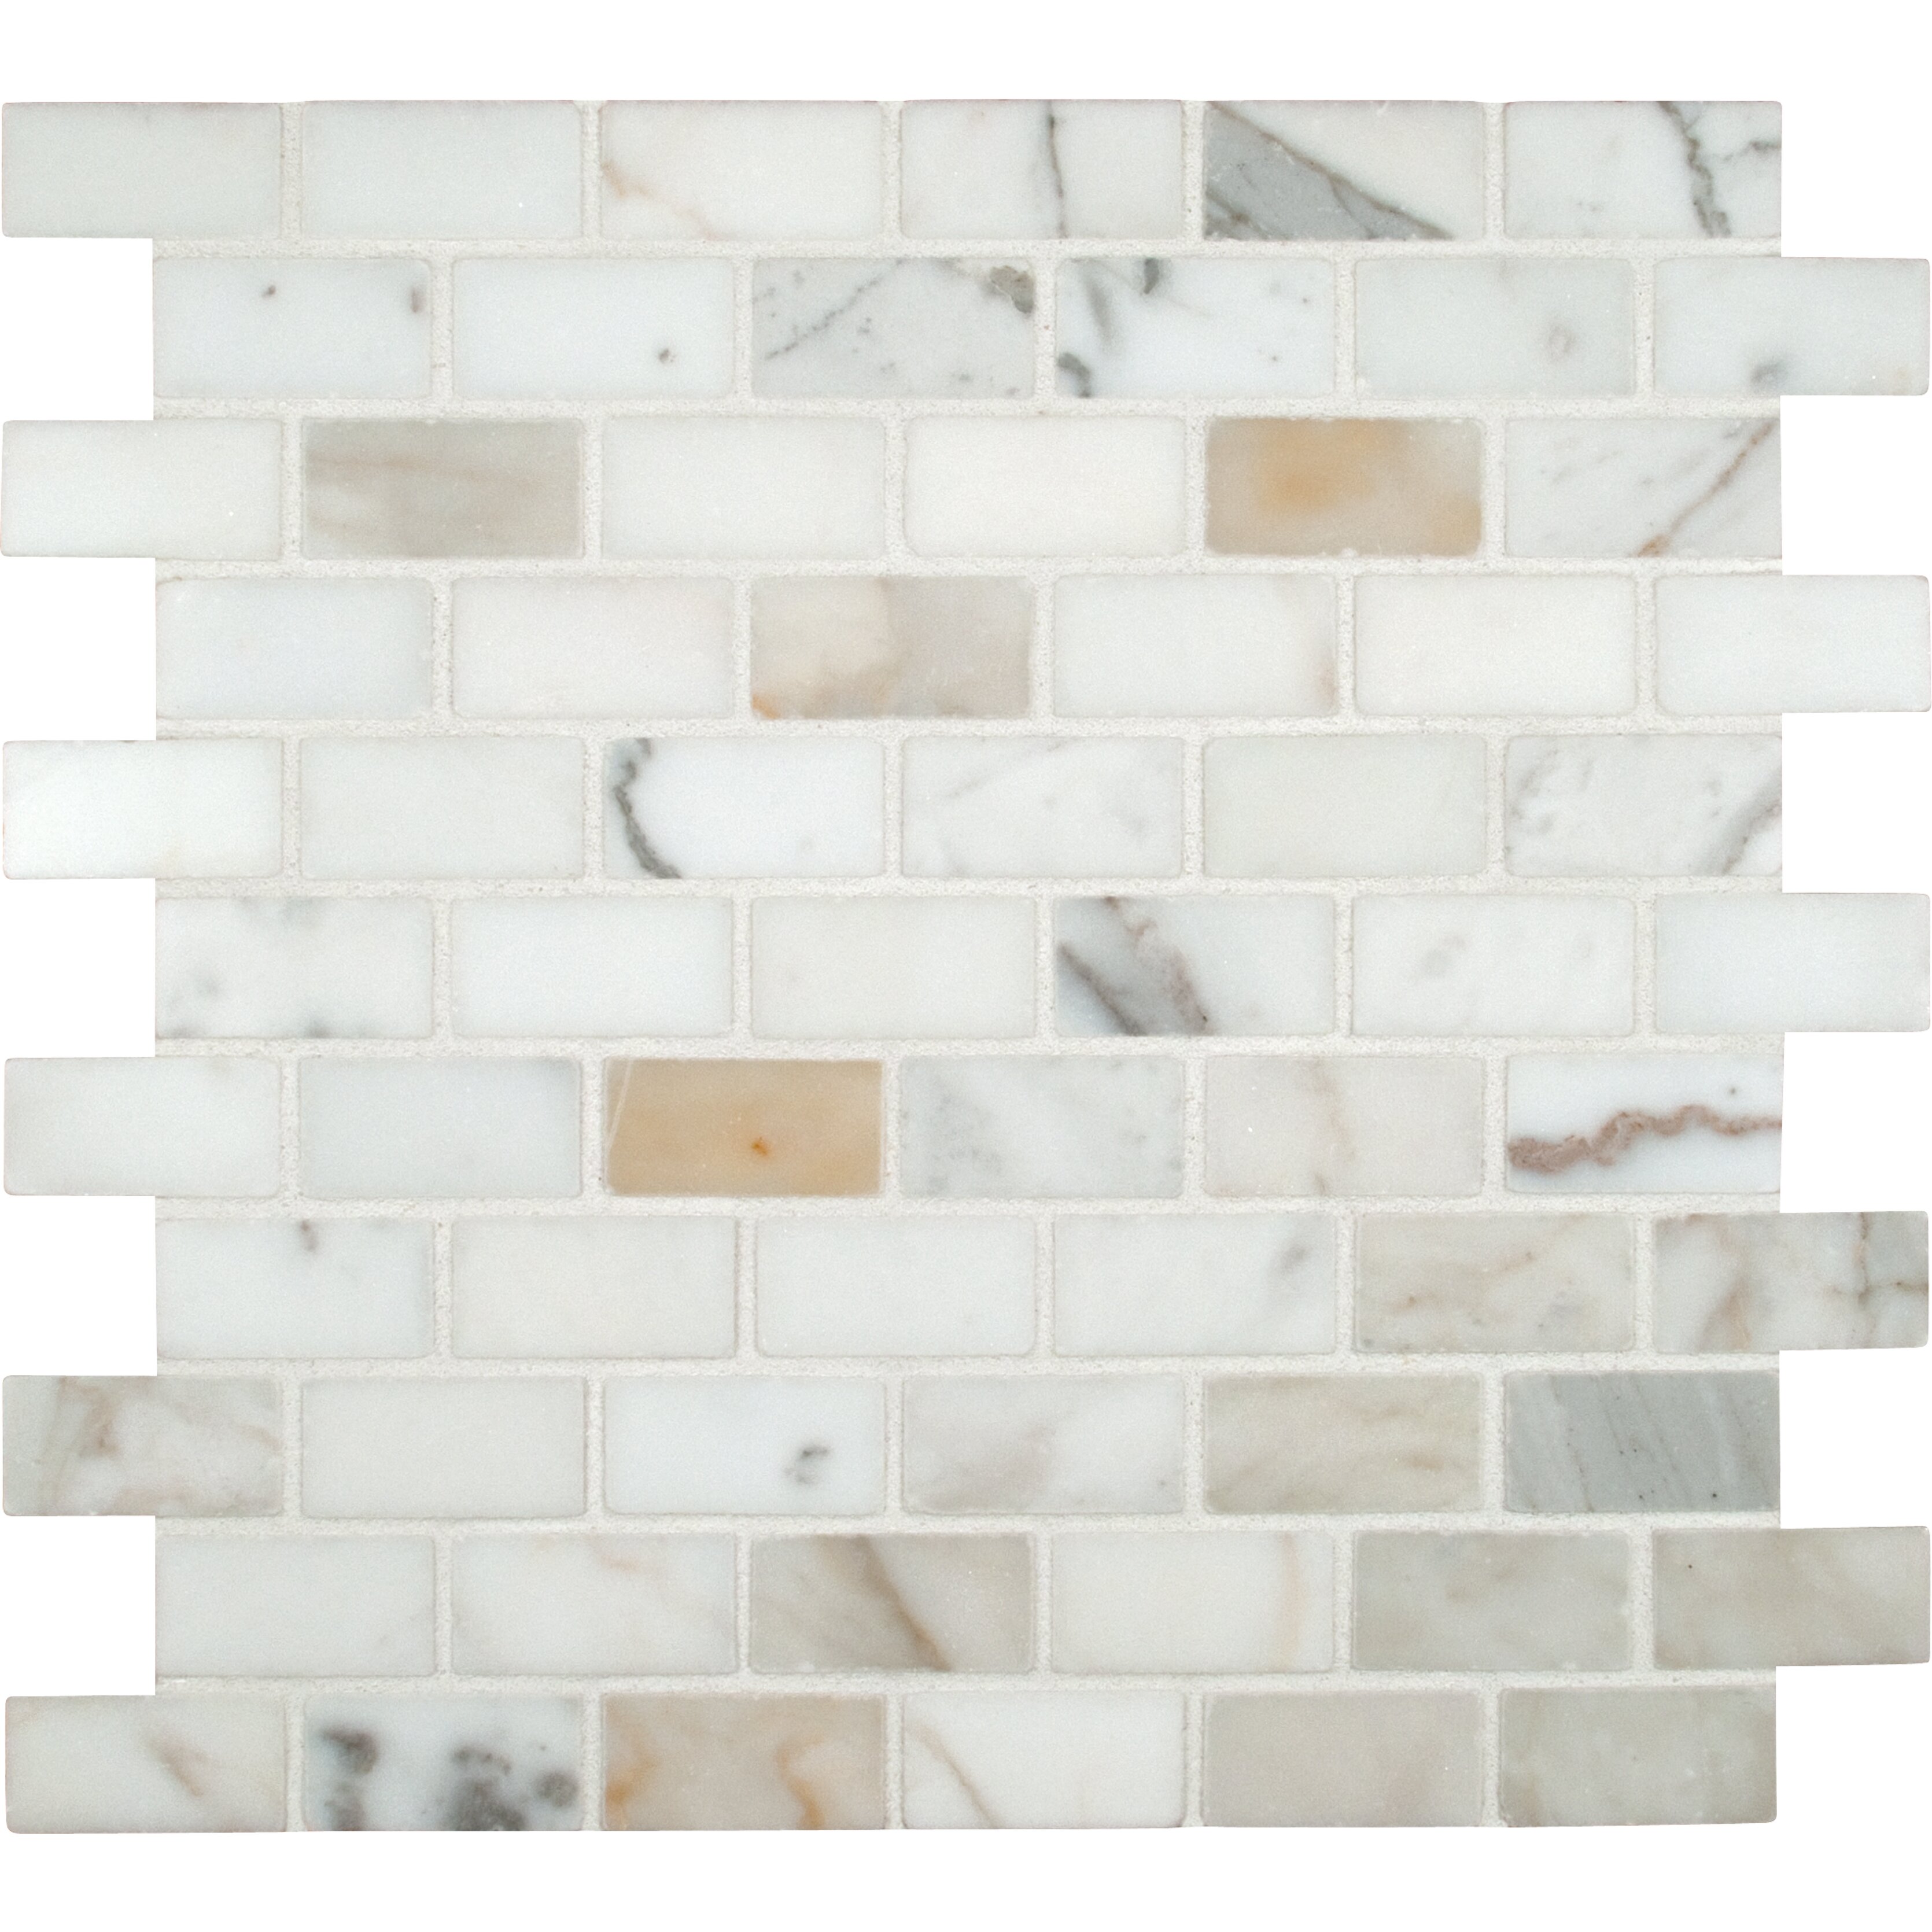 MSI Calacatta Gold Mounted 1" x 2" Marble Subway Tile in White